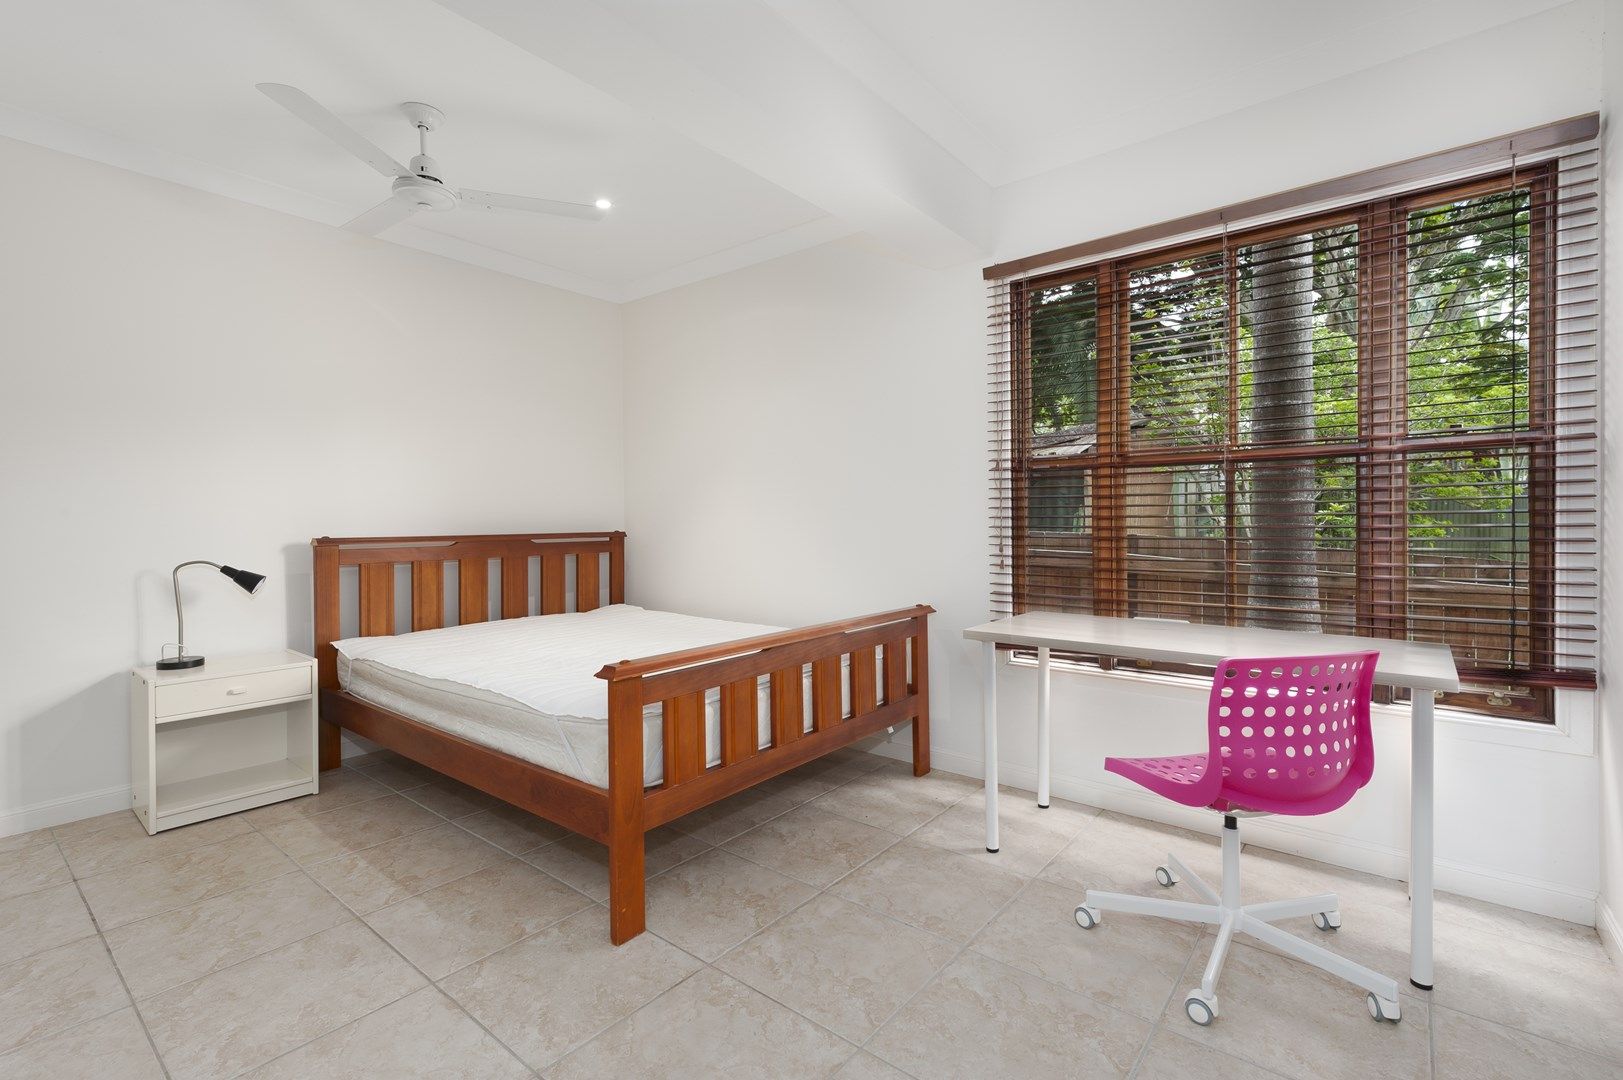 1 bedrooms House in 95 Munro Street ST LUCIA QLD, 4067